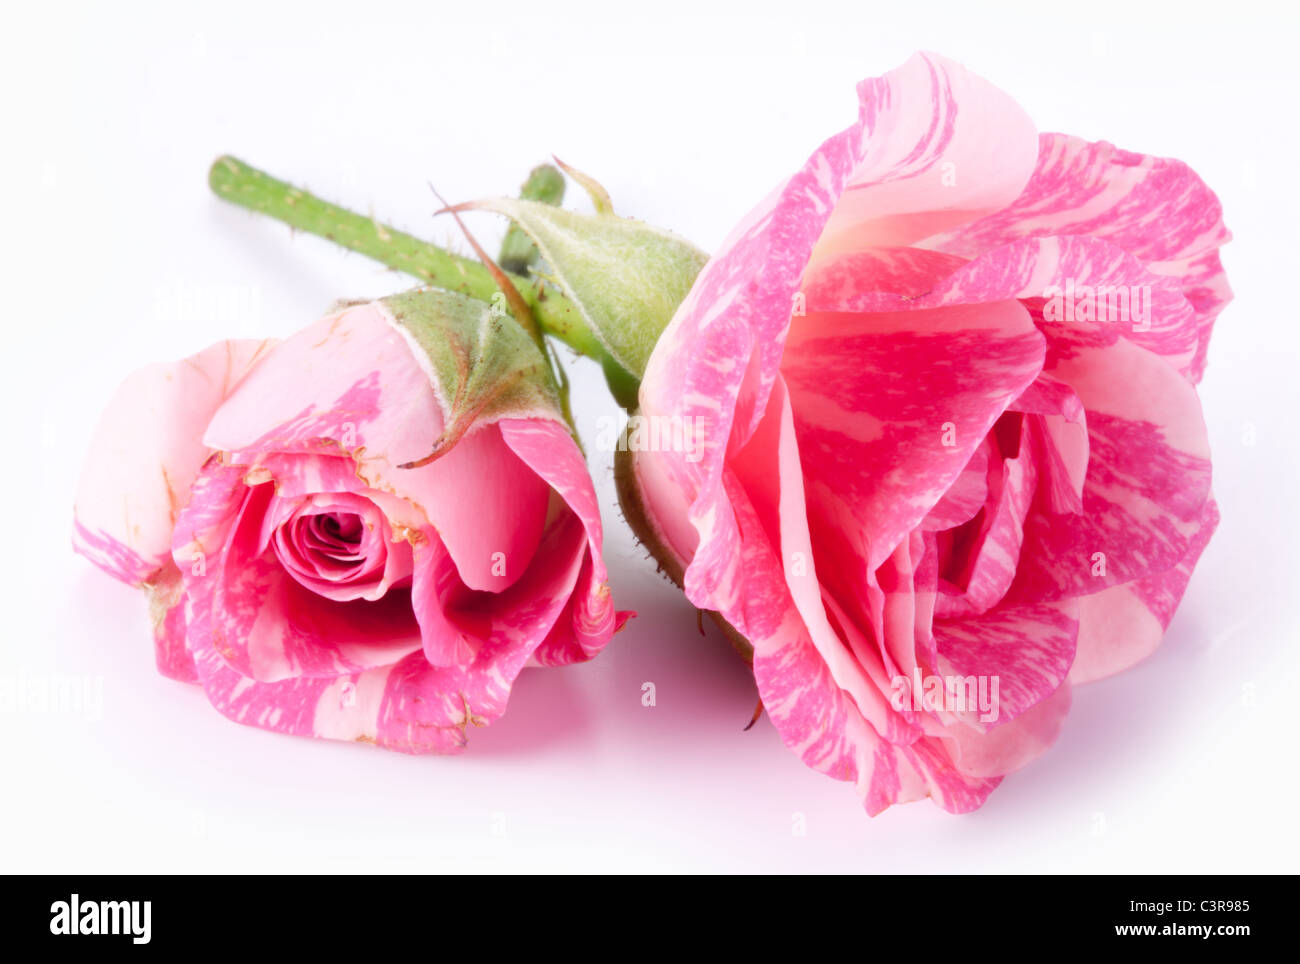 Two perfect roses on a white background. Stock Photo